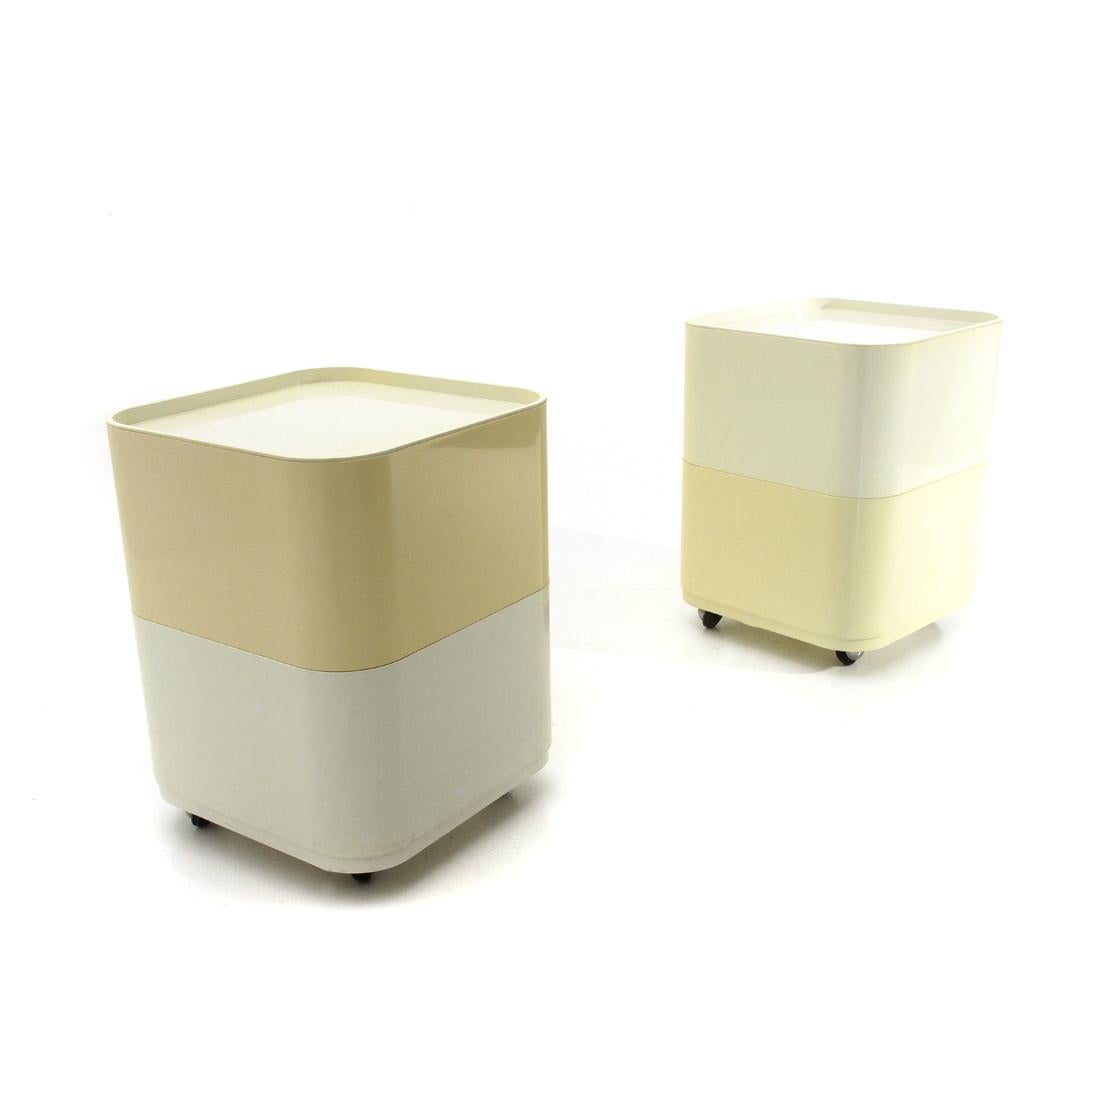 Late 20th Century Pair of Square Componibili Containers by Anna Castelli Ferrieri for Kartell 1970